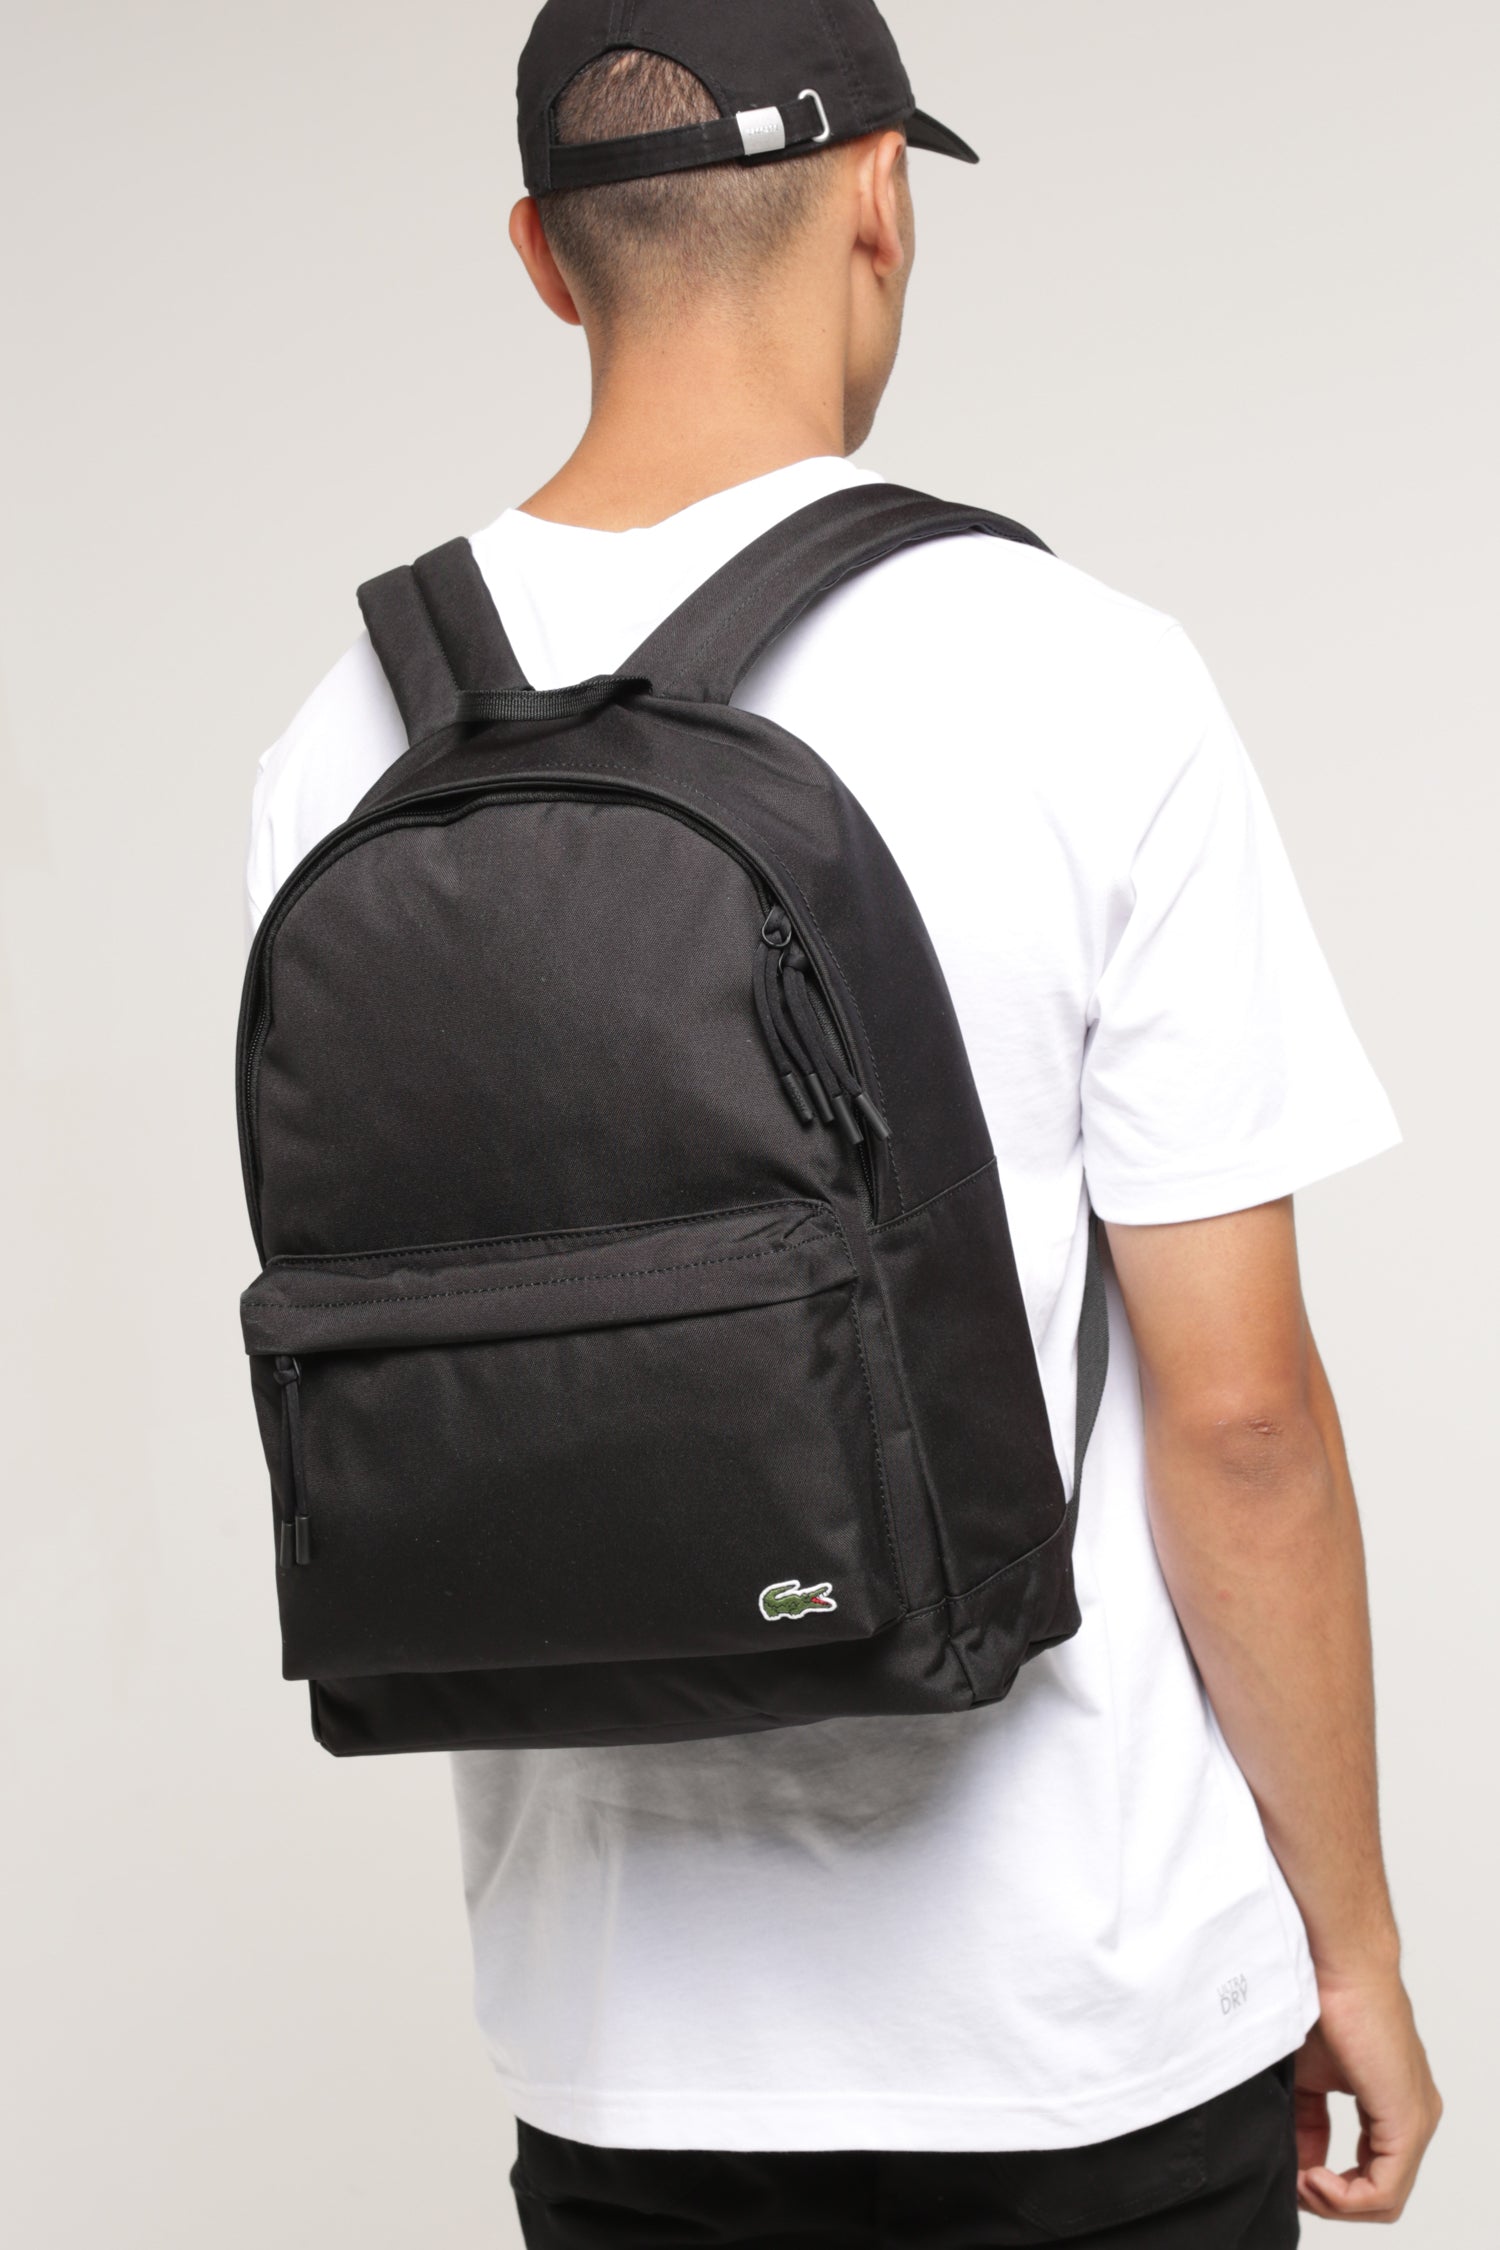 lacoste neocroc backpack